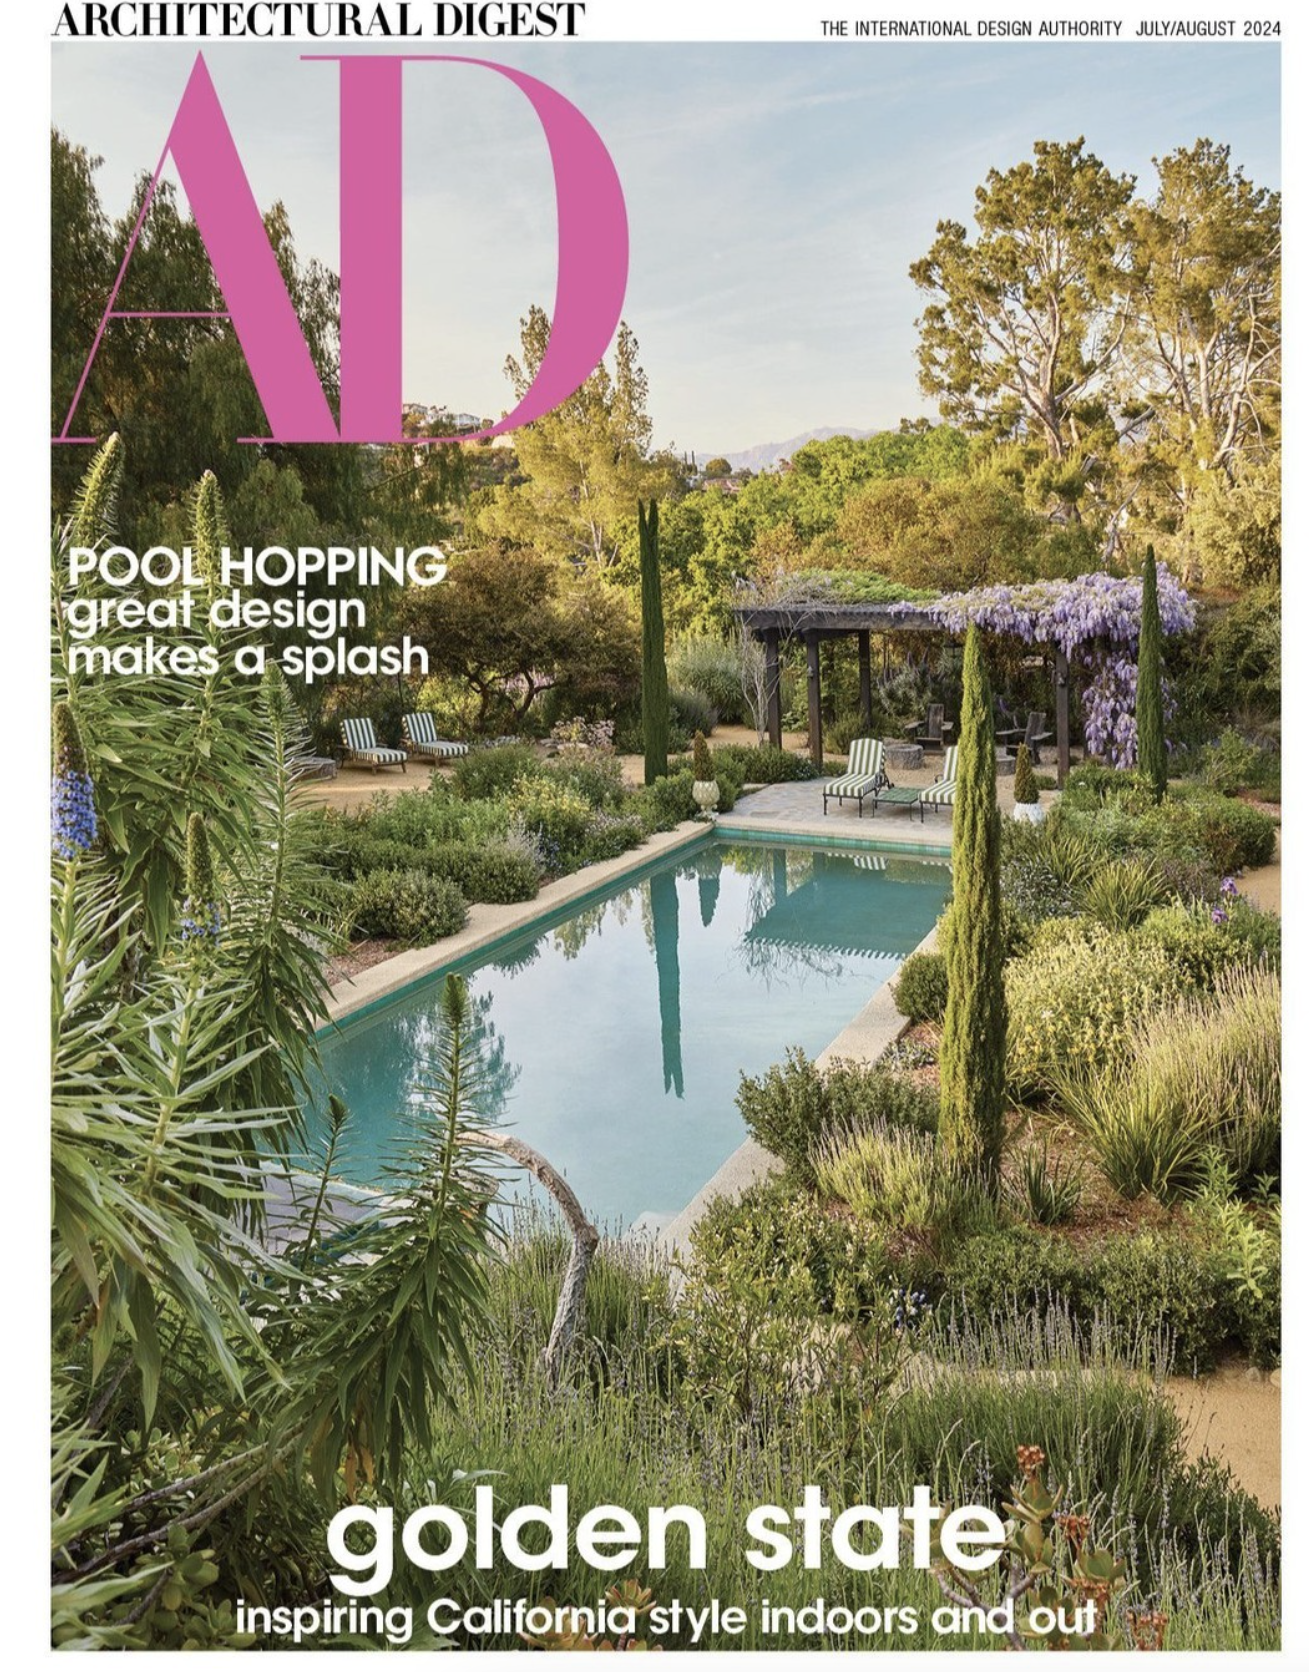 Architectural Digest, July/August 2024